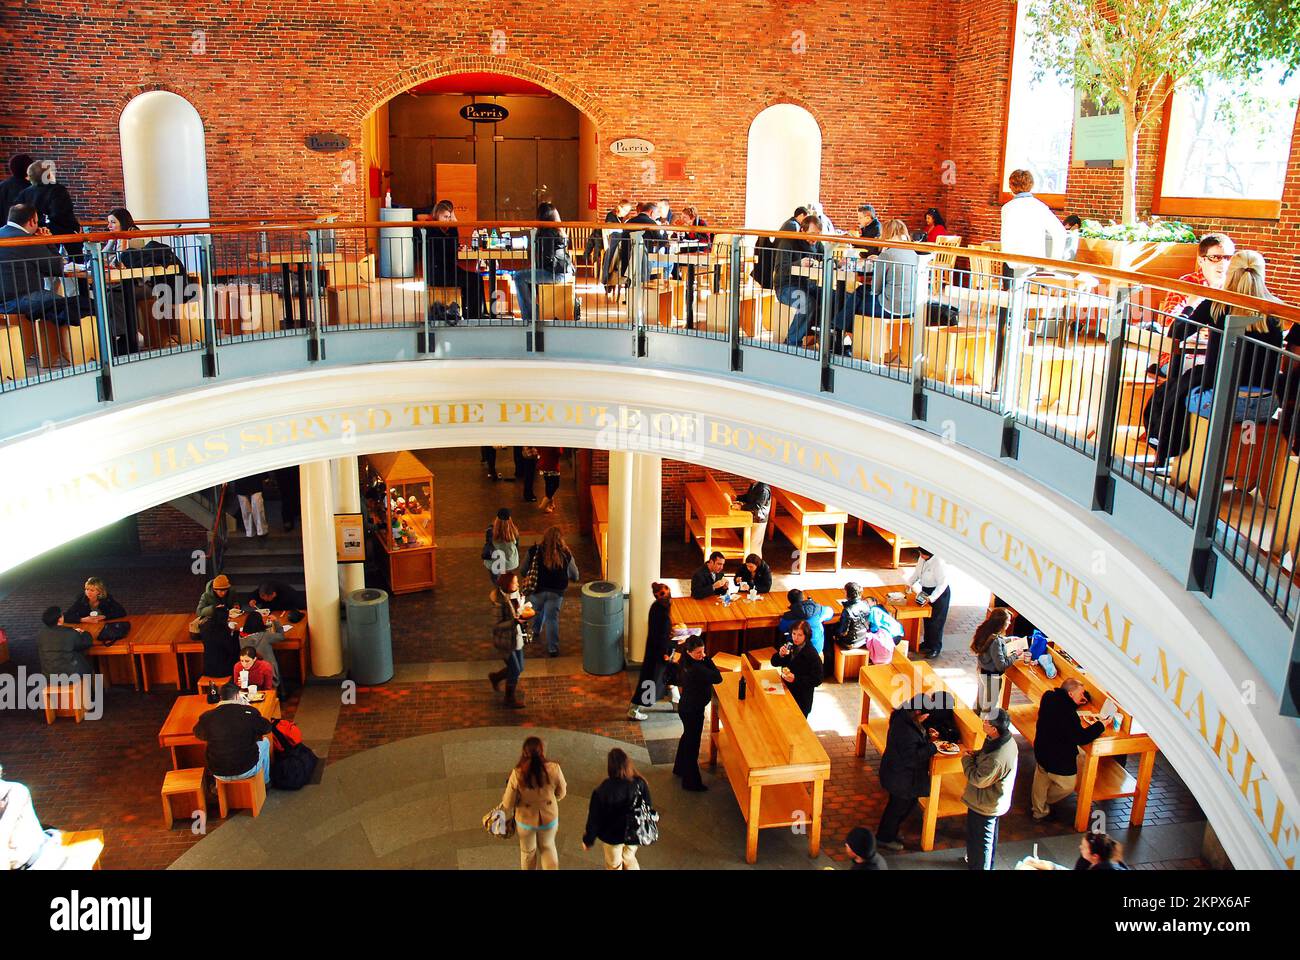 A lunchtime crowd gathers at the tables of the food court in Boston’s Quincy Market Stock Photo